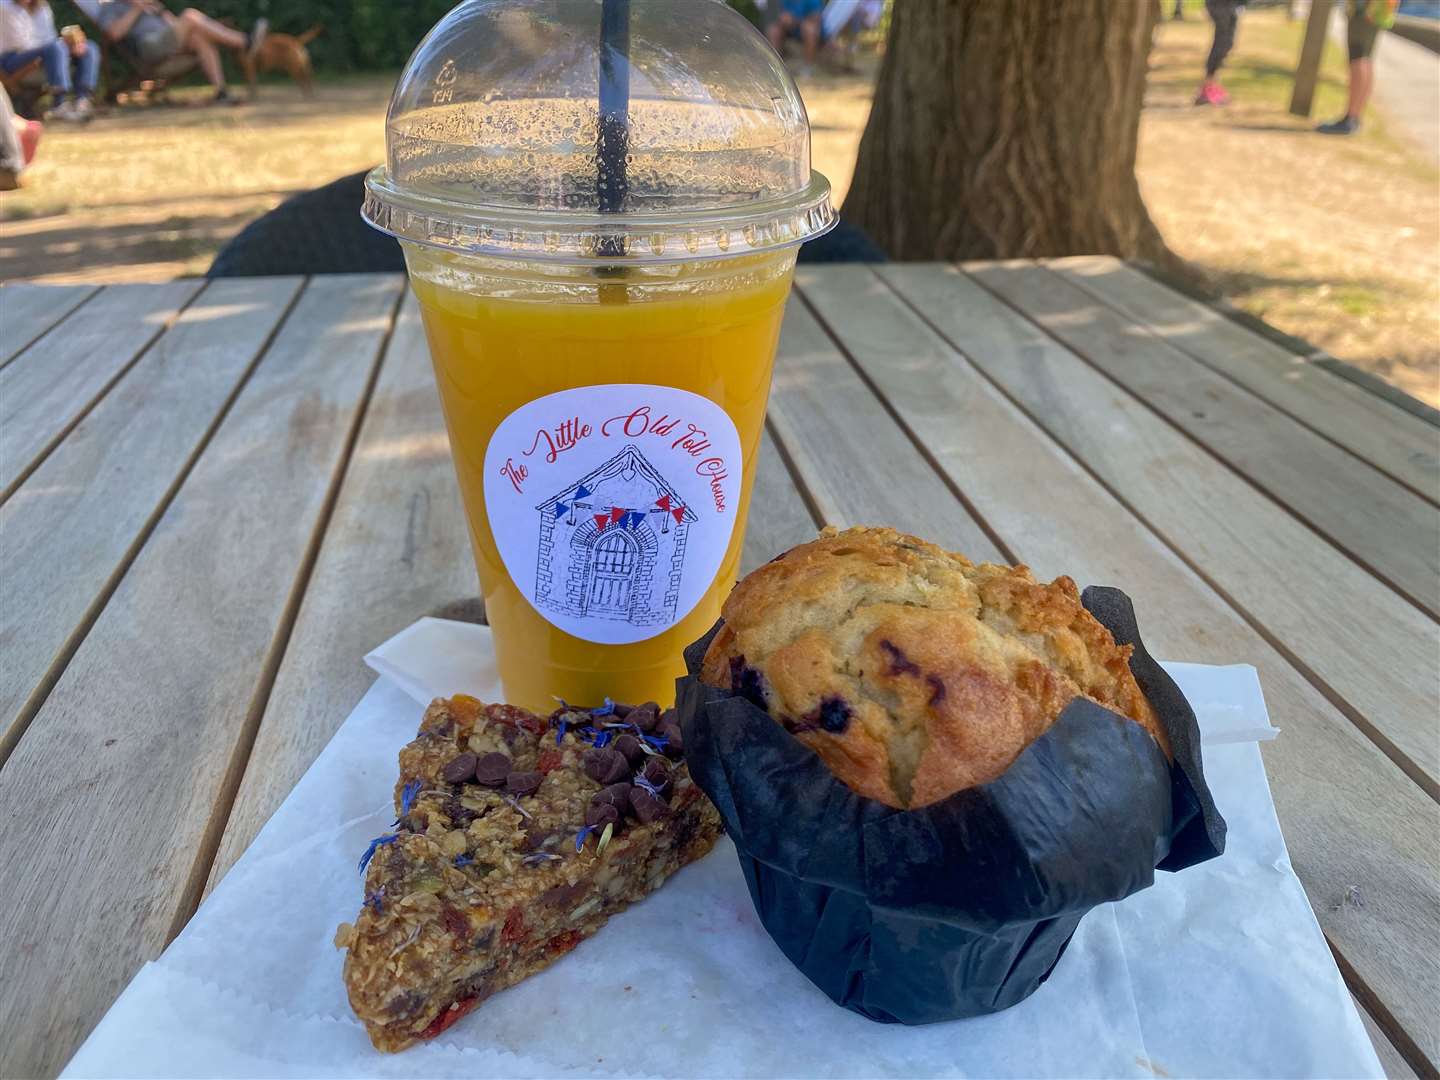 You can't beat freshly baked cakes and a cold orange juice. Picture: Sam Lawrie